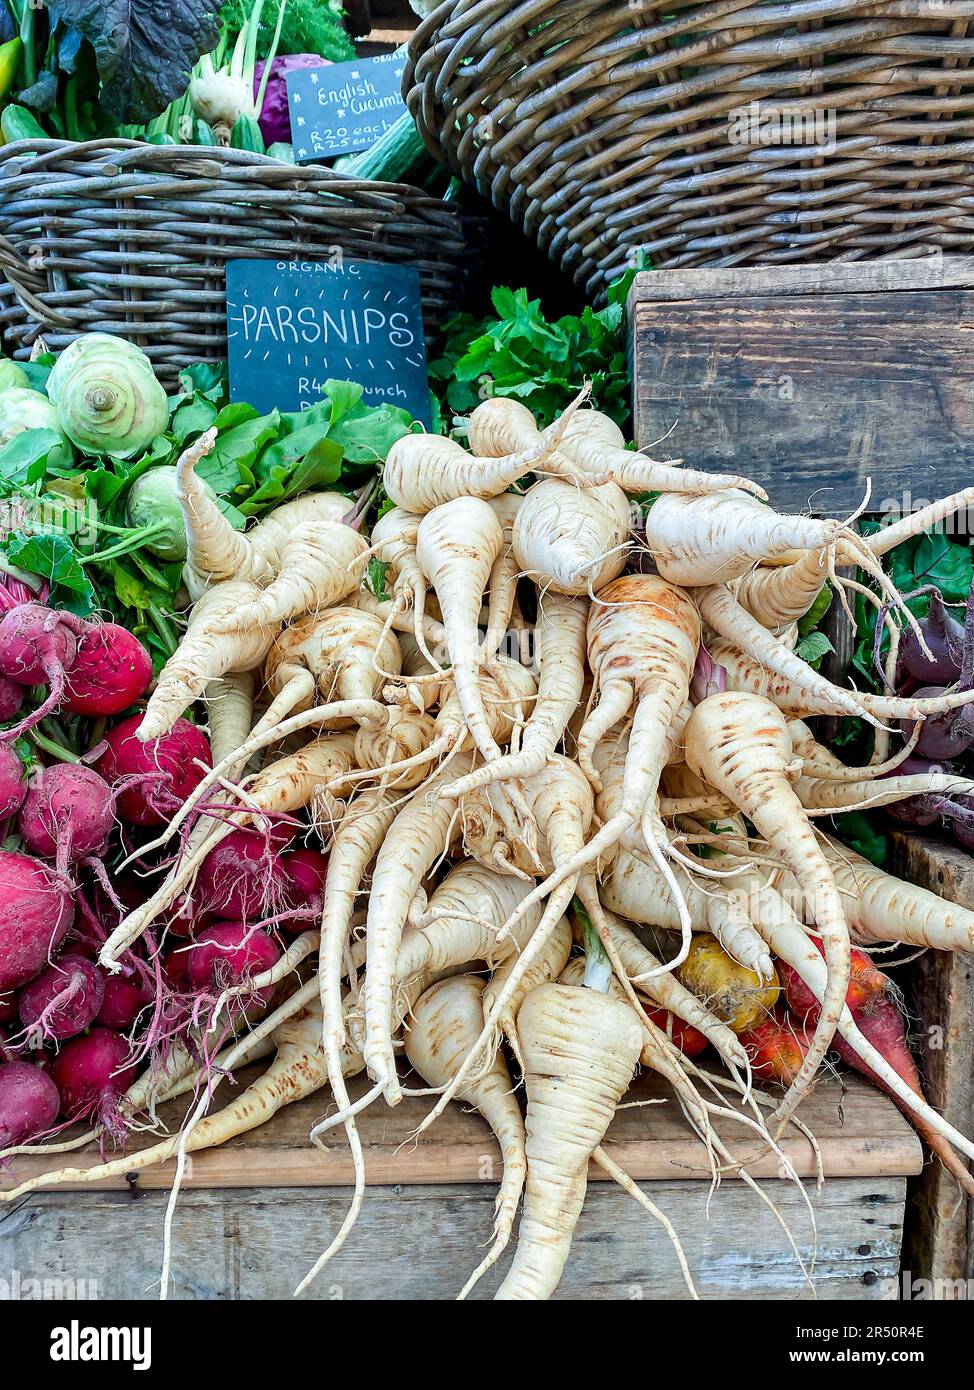 Assorted turnips at a farmers' market in Cape Town, South Africa Stock Photo